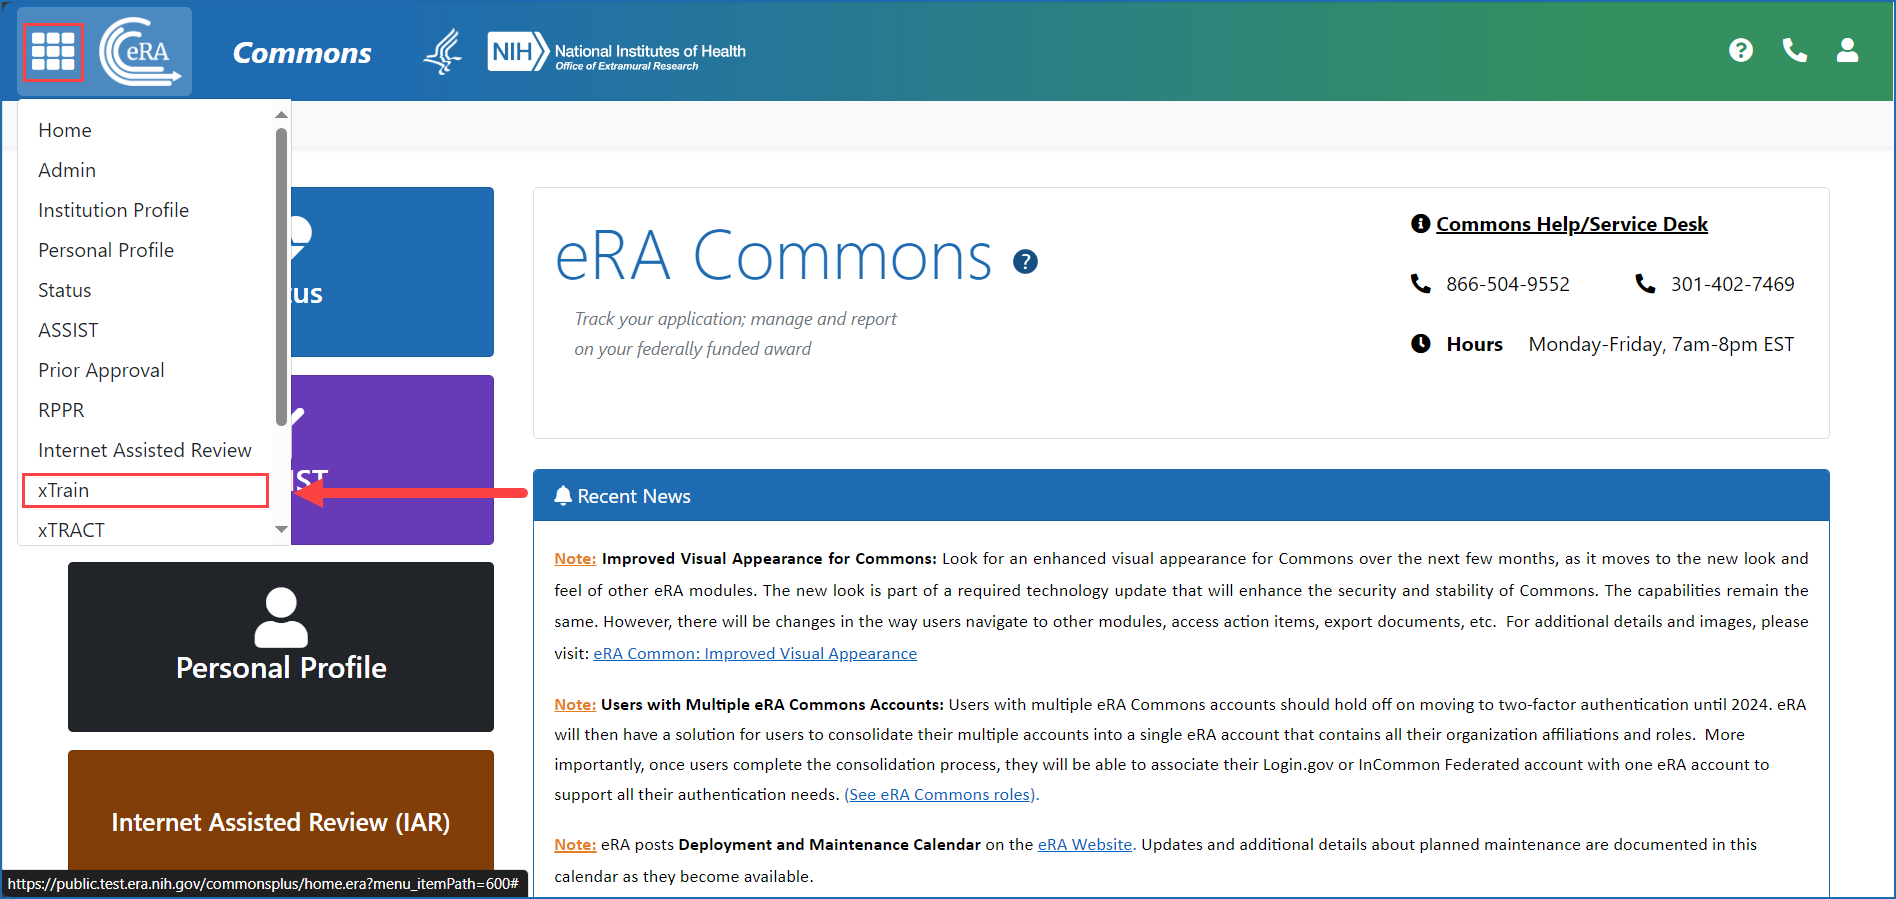 eRA Commons xTrain option from the apps icon menu